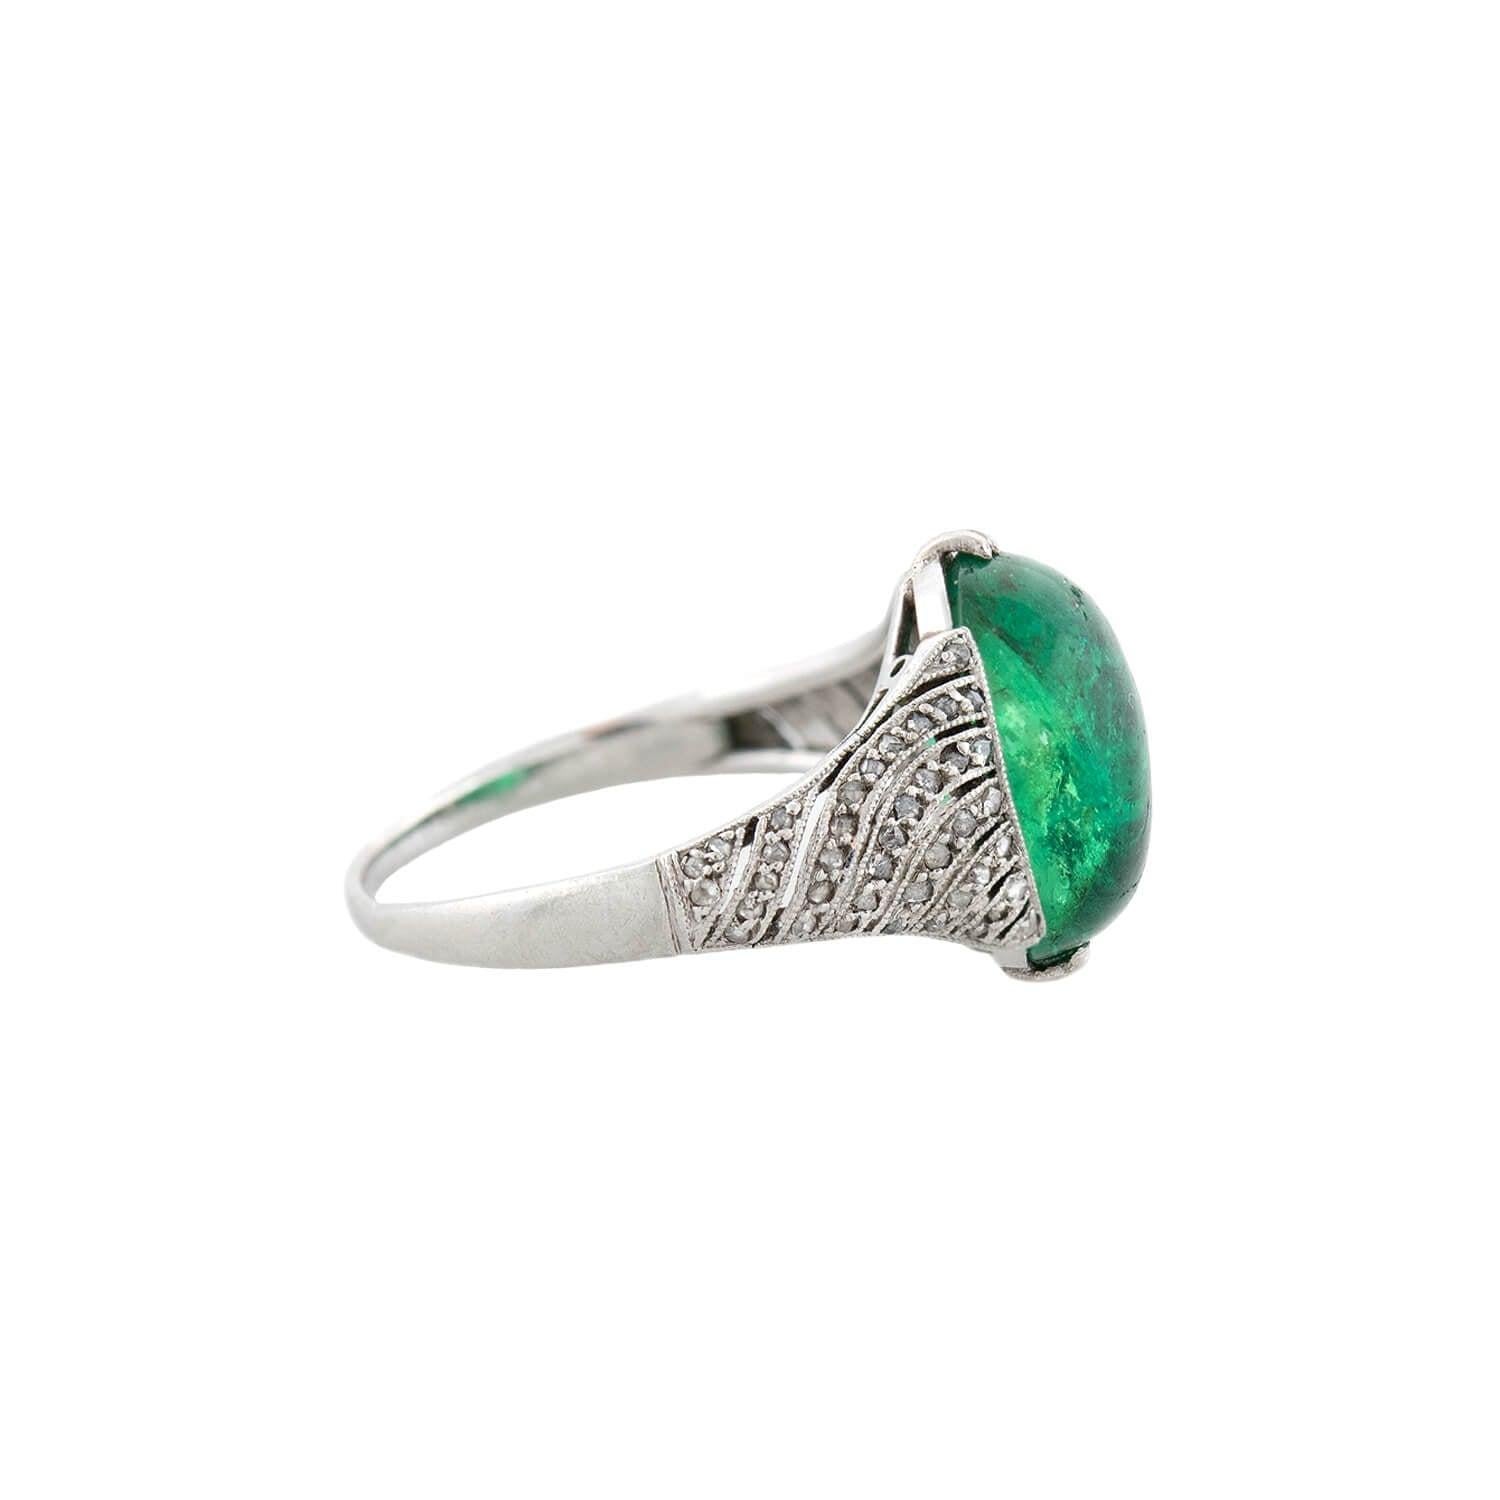 An impressive ring from the Edwardian (ca1910s) era! Crafted in platinum, this ring adorns a mesmerizing green emerald cabochon! The oval-shaped stone is of Columbian origin and exhibits beautiful, vibrant shades of green, held within a unique